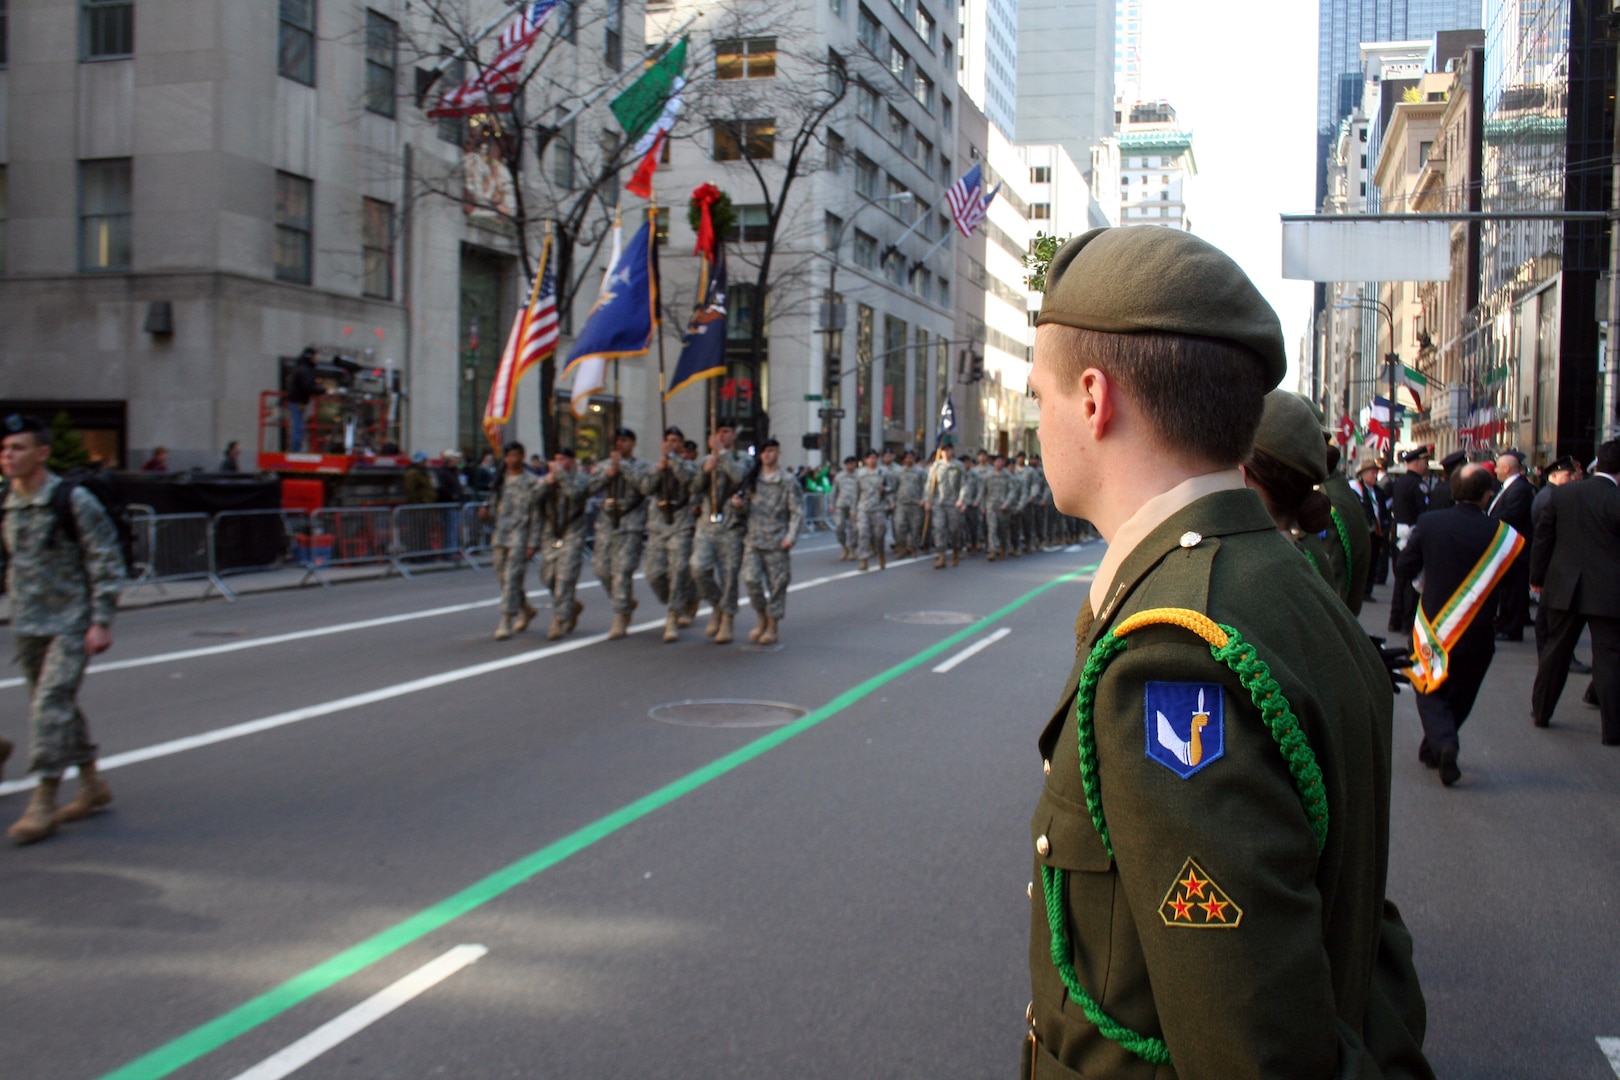 Members of the Irish Army's 58th Infantry Battalion render honors as Soldiers of the New York Army National Guard's 1st Battalion, 69th Infantry Regiment pass outside Saint Patrick's Cathedral during the annual march up Fifth Avenue in the world's largest St. Patrick's Day Parade in New York City on March 17. 2010.